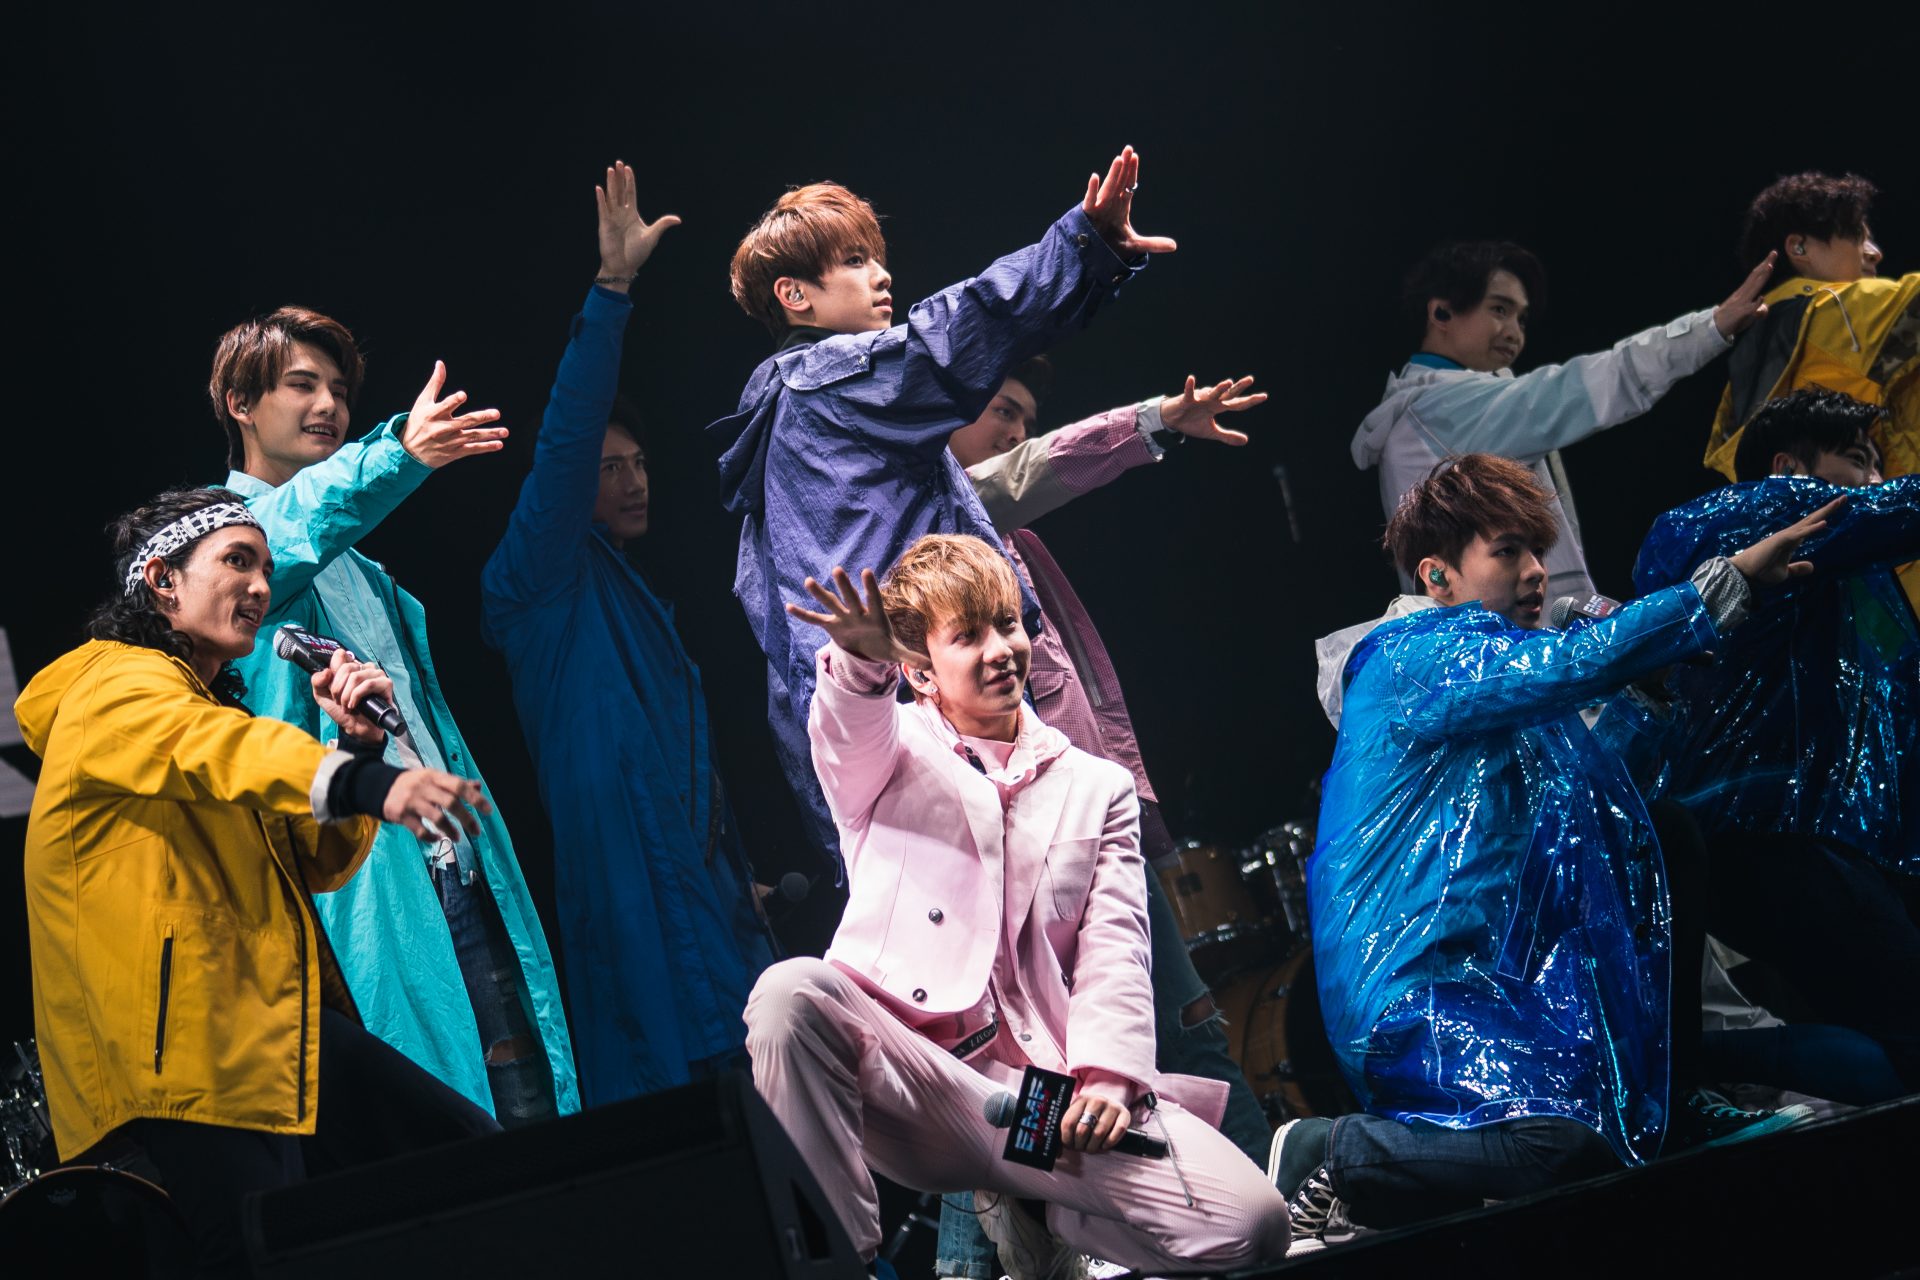 <p>Mirror's first concert was sold out in 2018, and the group planned to do another one in 2020 at the famous Kowloon Bay International Trade & Exhibition Centre Star Hall to mark their second anniversary.</p>